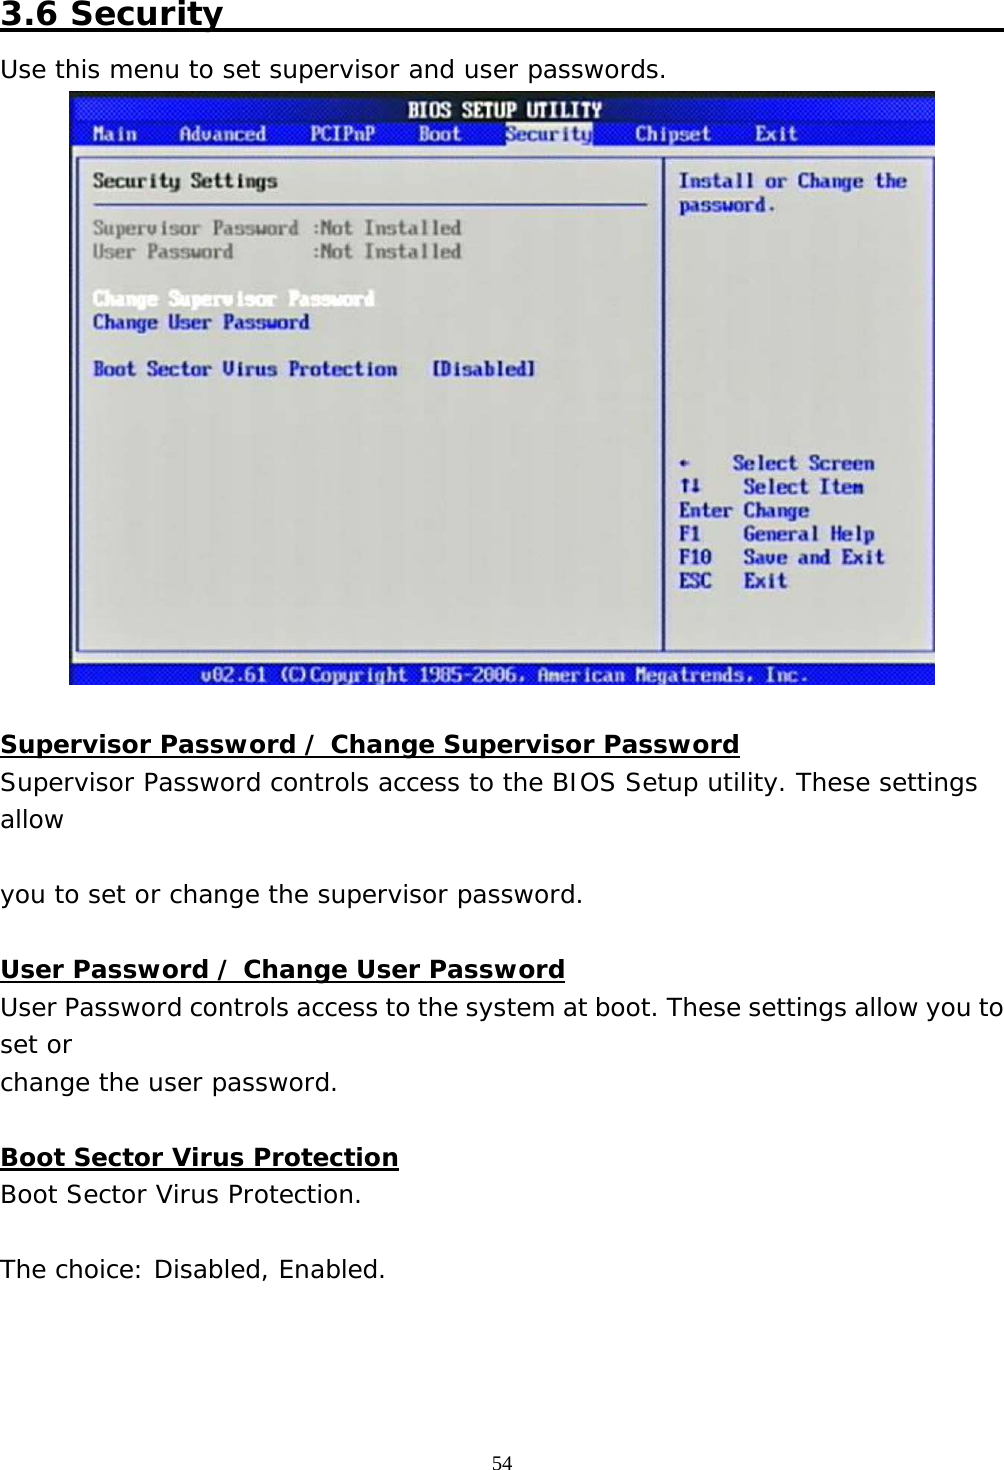  54 3.6 Security                                                  Use this menu to set supervisor and user passwords.   Supervisor Password / Change Supervisor Password Supervisor Password controls access to the BIOS Setup utility. These settings allow  you to set or change the supervisor password.  User Password / Change User Password User Password controls access to the system at boot. These settings allow you to set or change the user password.  Boot Sector Virus Protection Boot Sector Virus Protection.  The choice: Disabled, Enabled.    